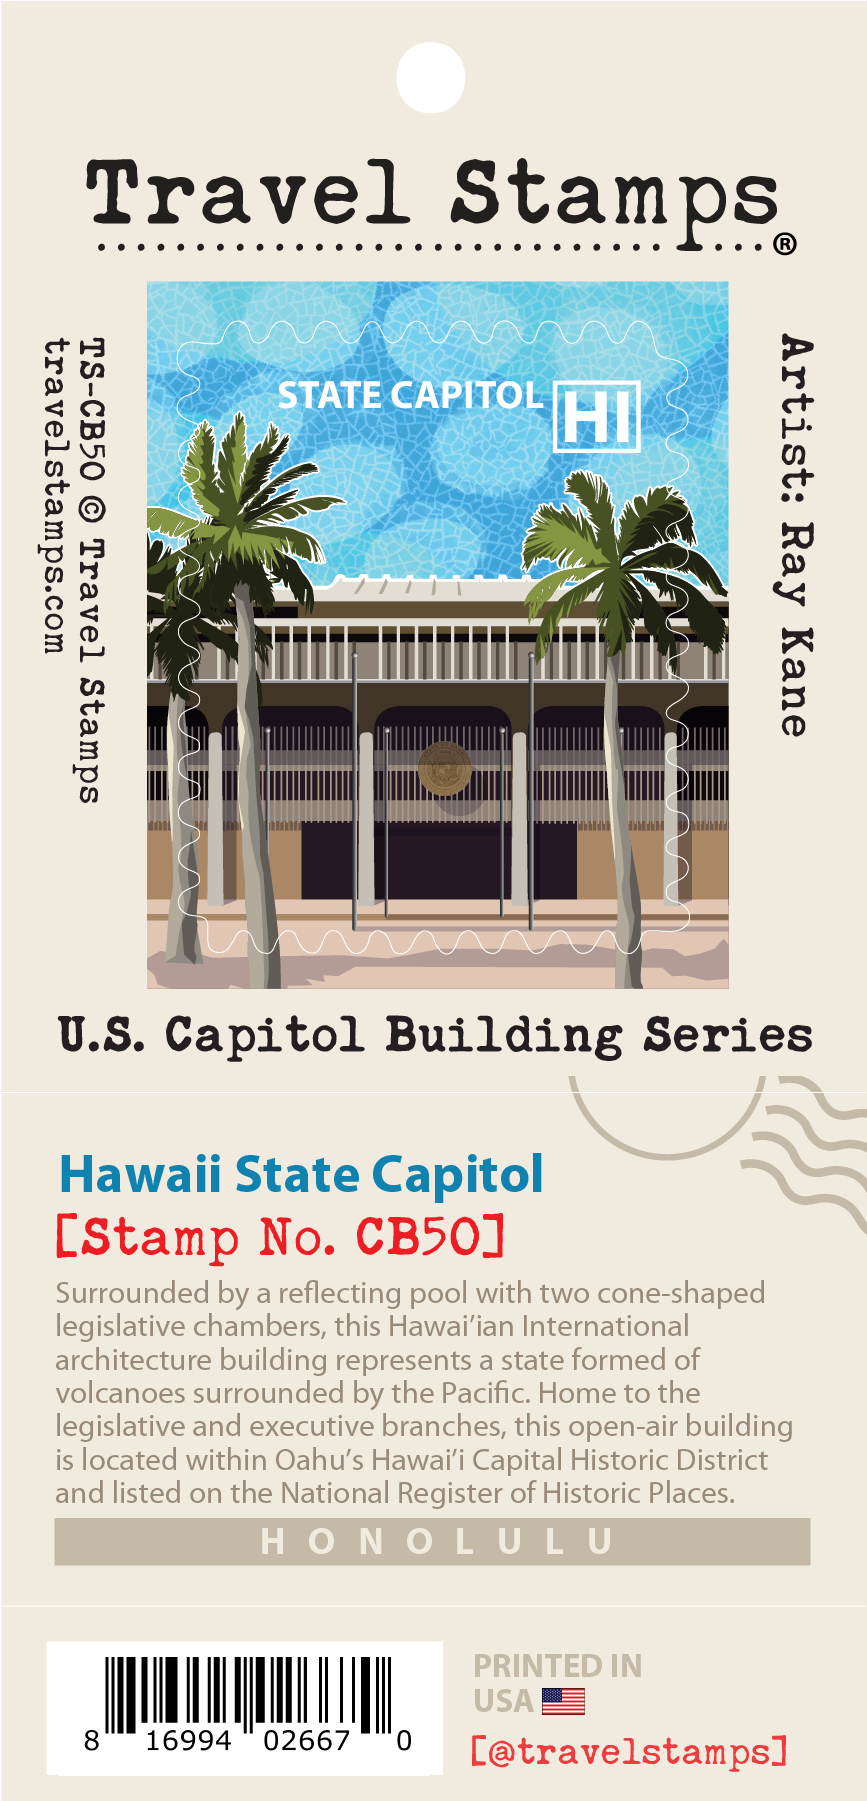 Safe Travel Stamp Archives  Hawaii Tours and Activities